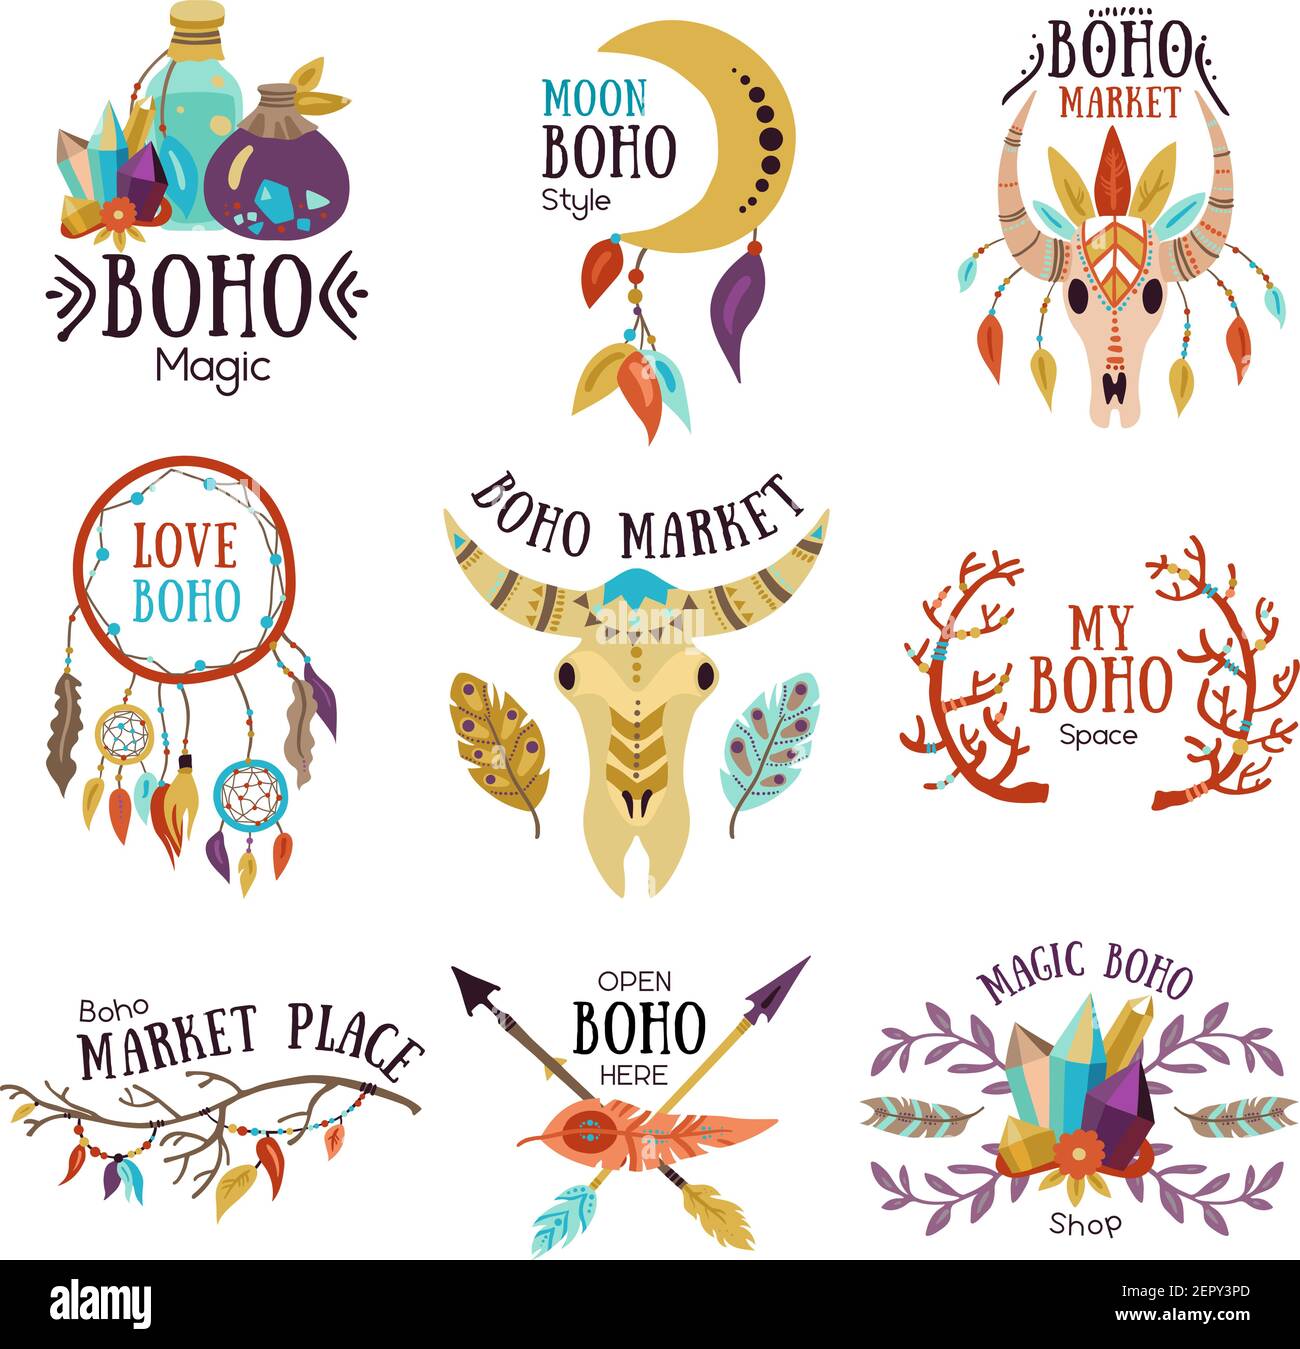 Boho magic symbols emblems collection for market place with moon dream catcher buffalo head isolated vector illustration Stock Vector